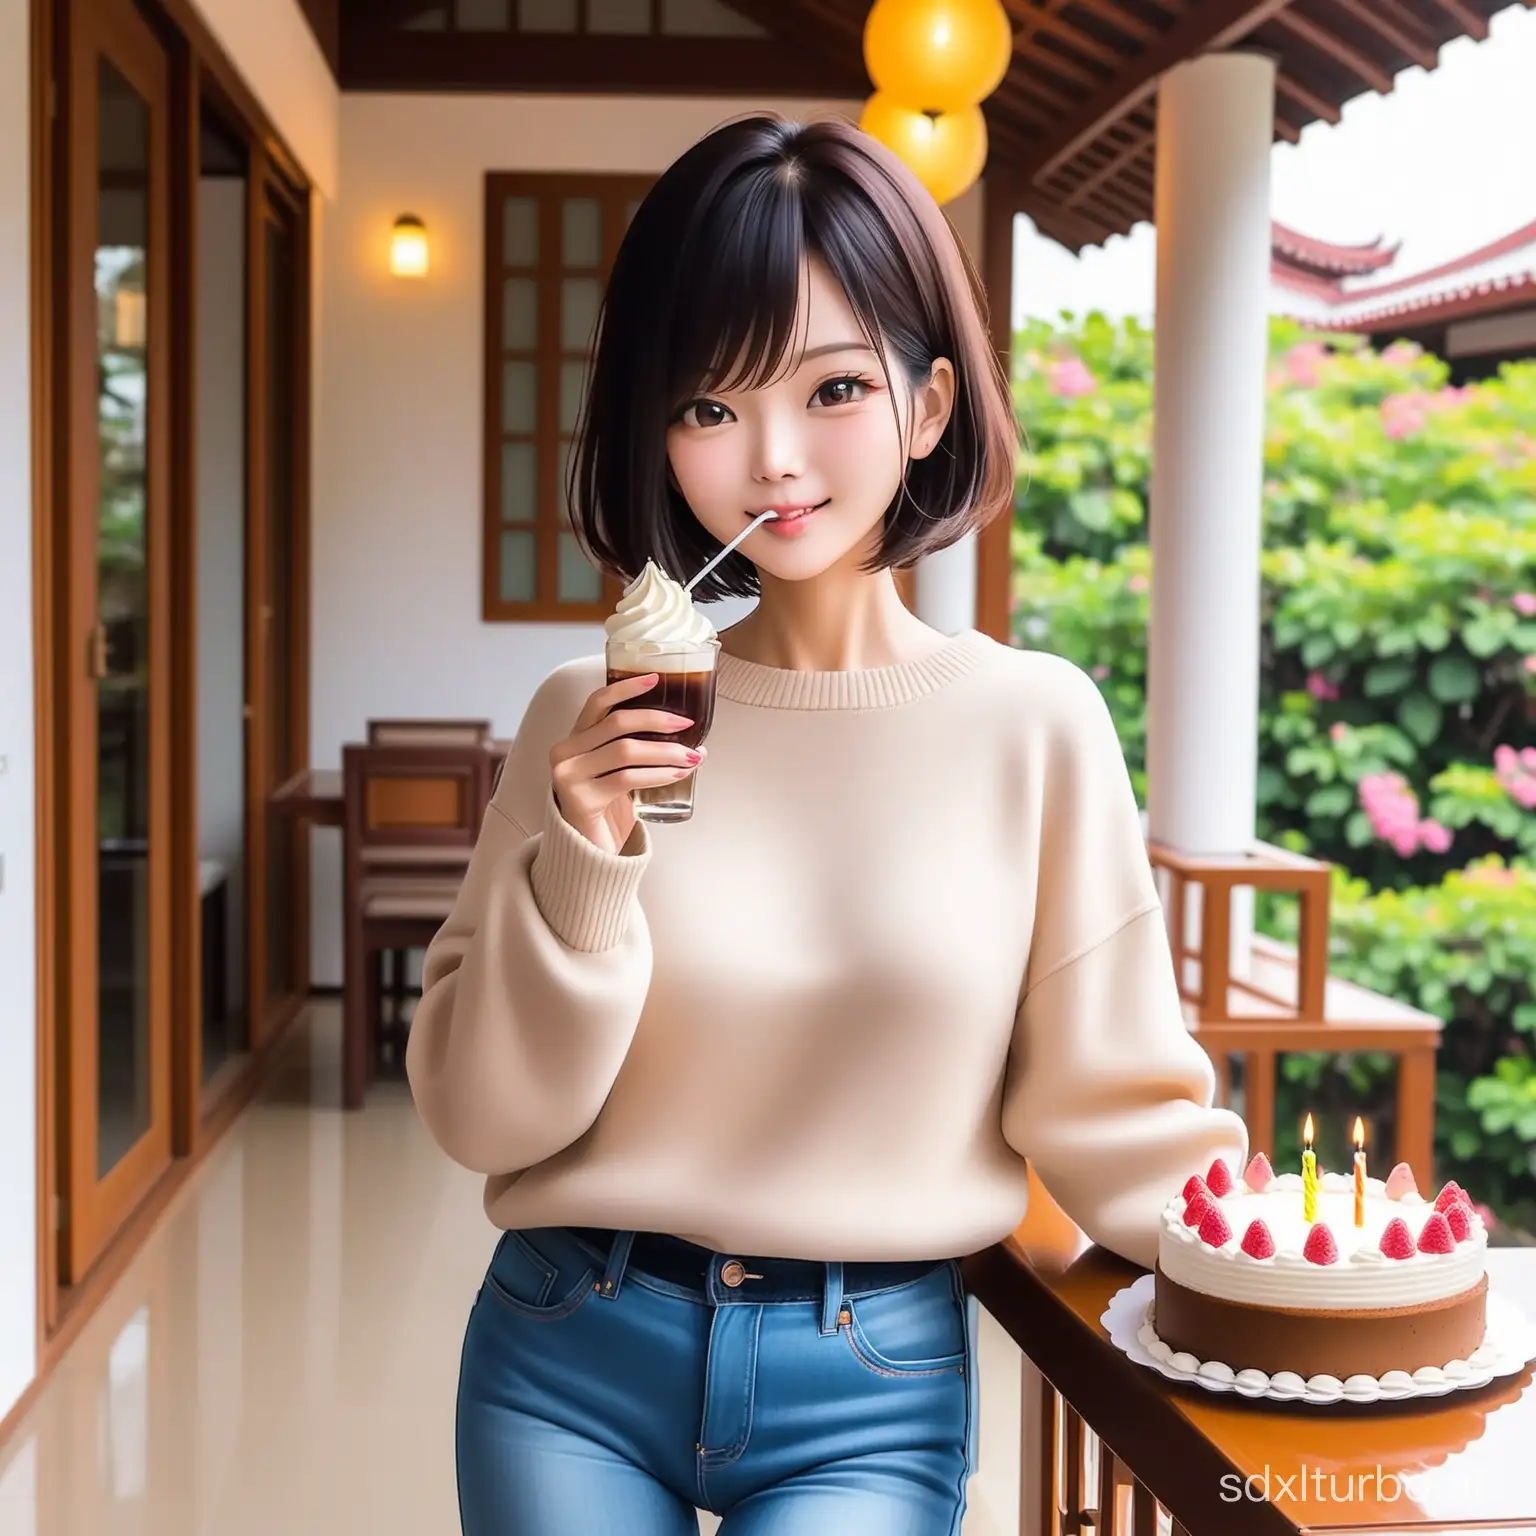 In front of a beautiful villa, a 45-year-old beautiful Taiwanese girl with shoulder-length short hair, wearing a sweater and jeans, was drinking to celebrate her birthday, with a beautiful birthday cake.